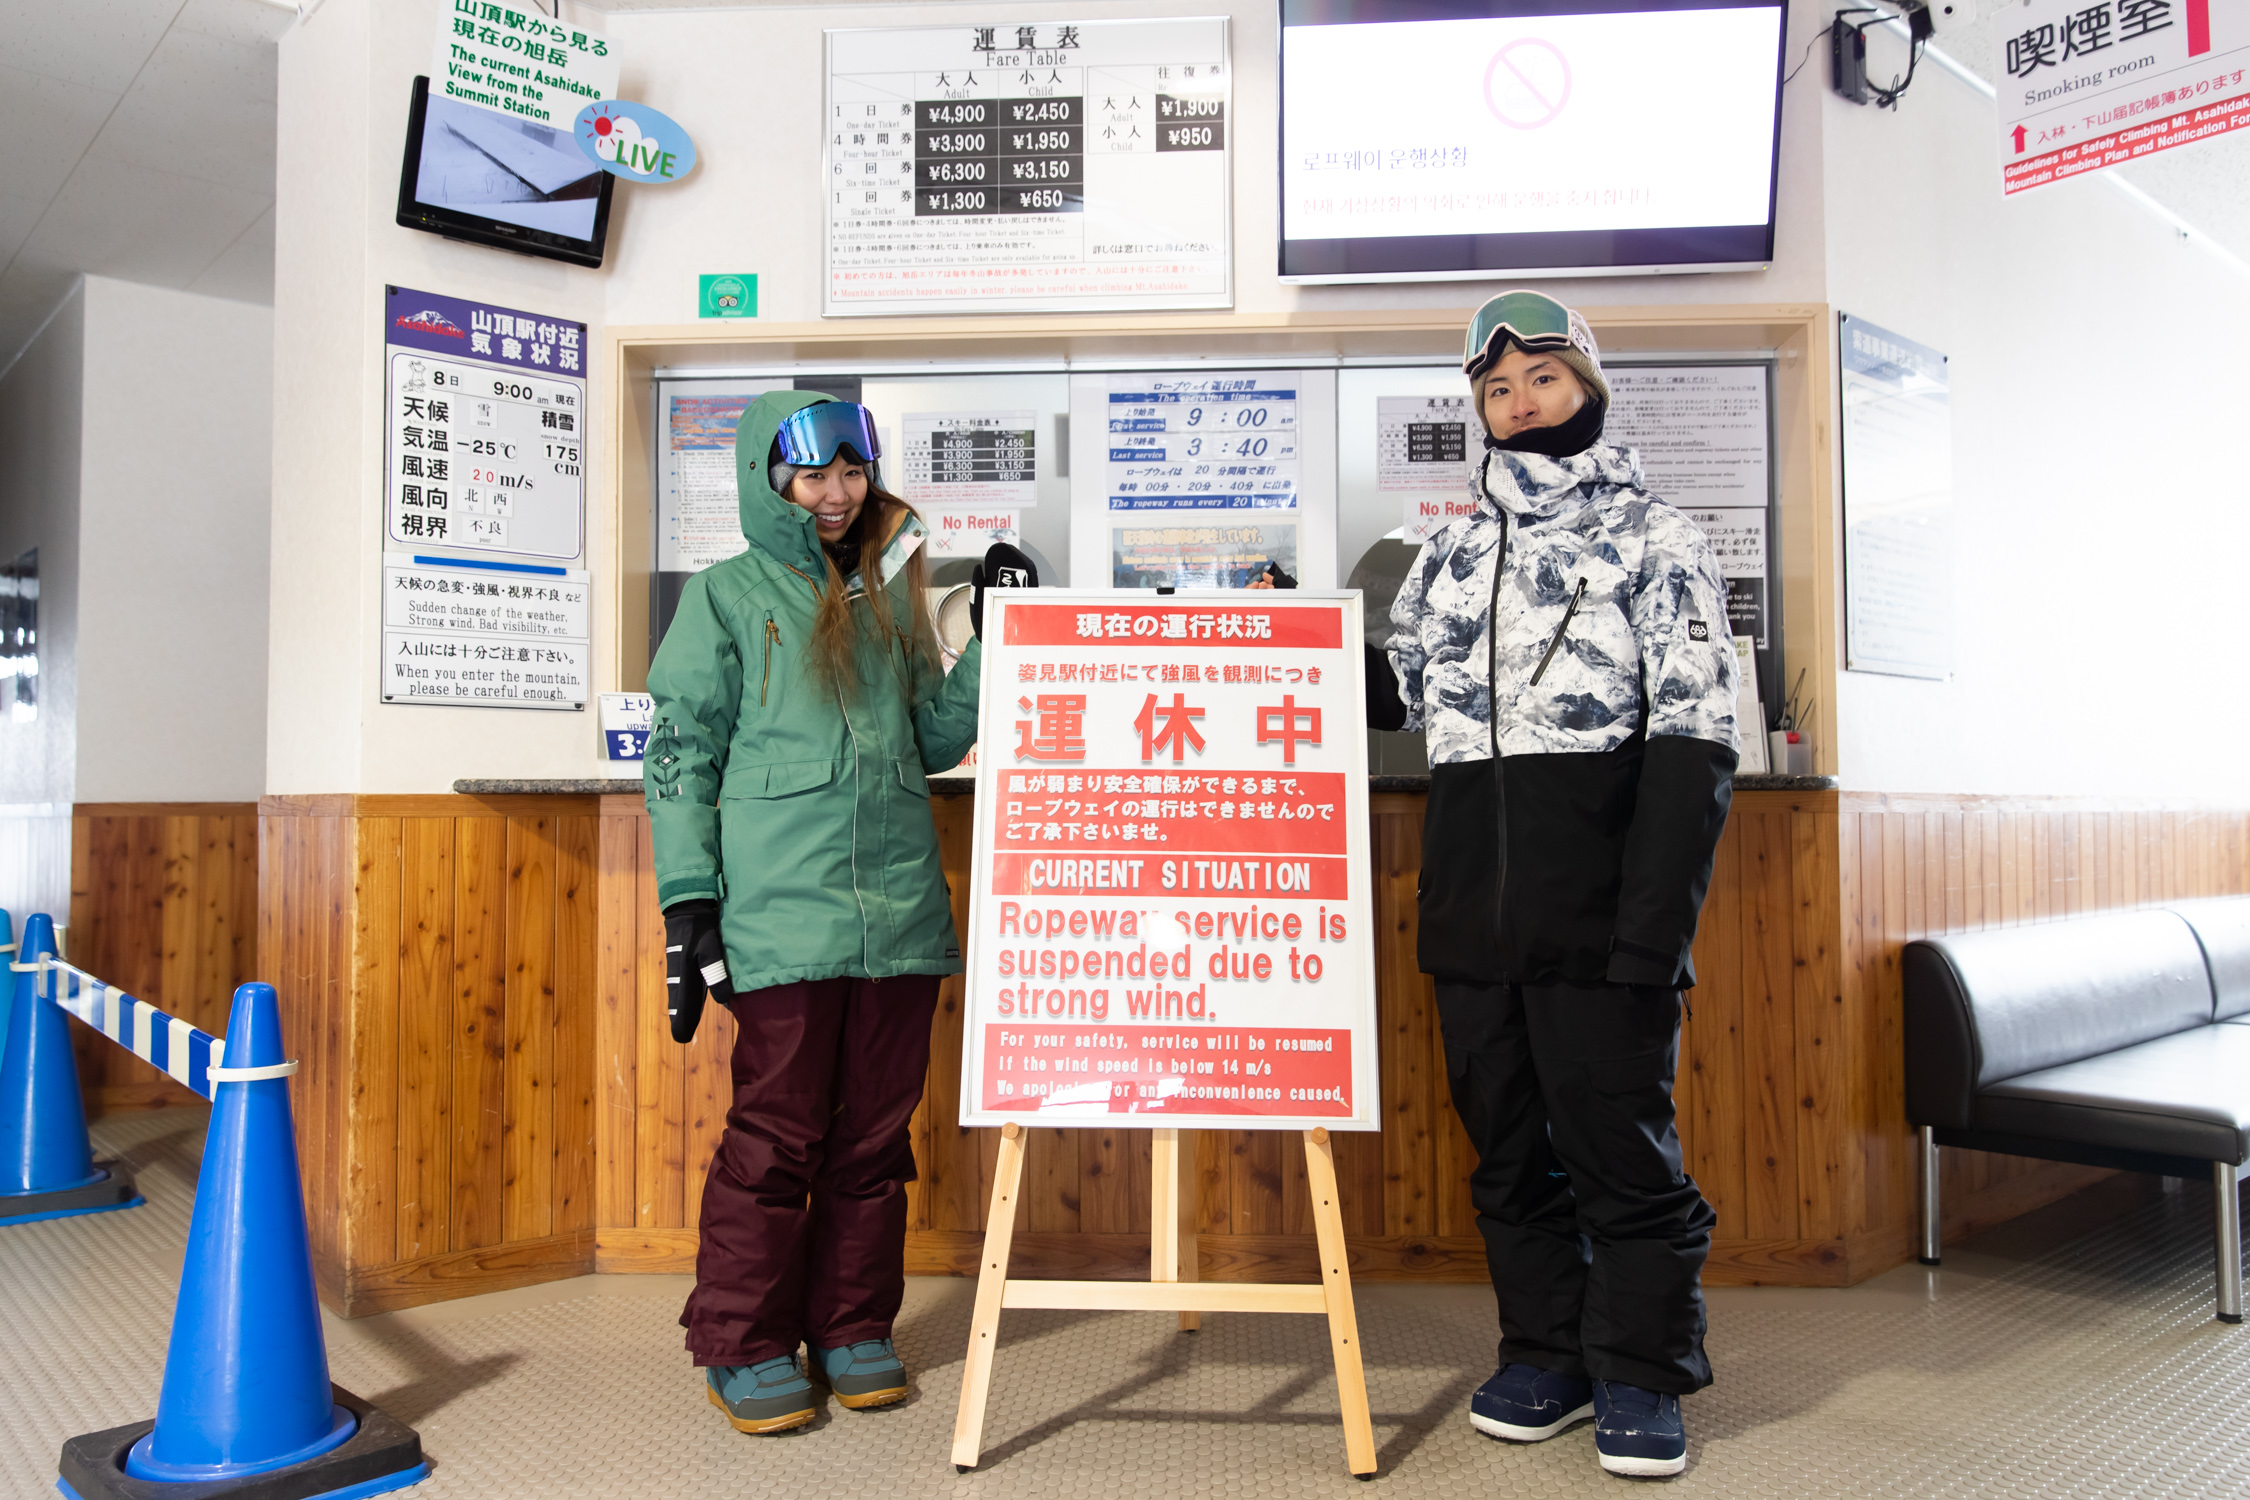 A signboard for suspension of ticket office.On the left, there is an indication that the temperature is -25 ° C and the wind speed is 20m / s in the weather conditions near the mountaintop station.